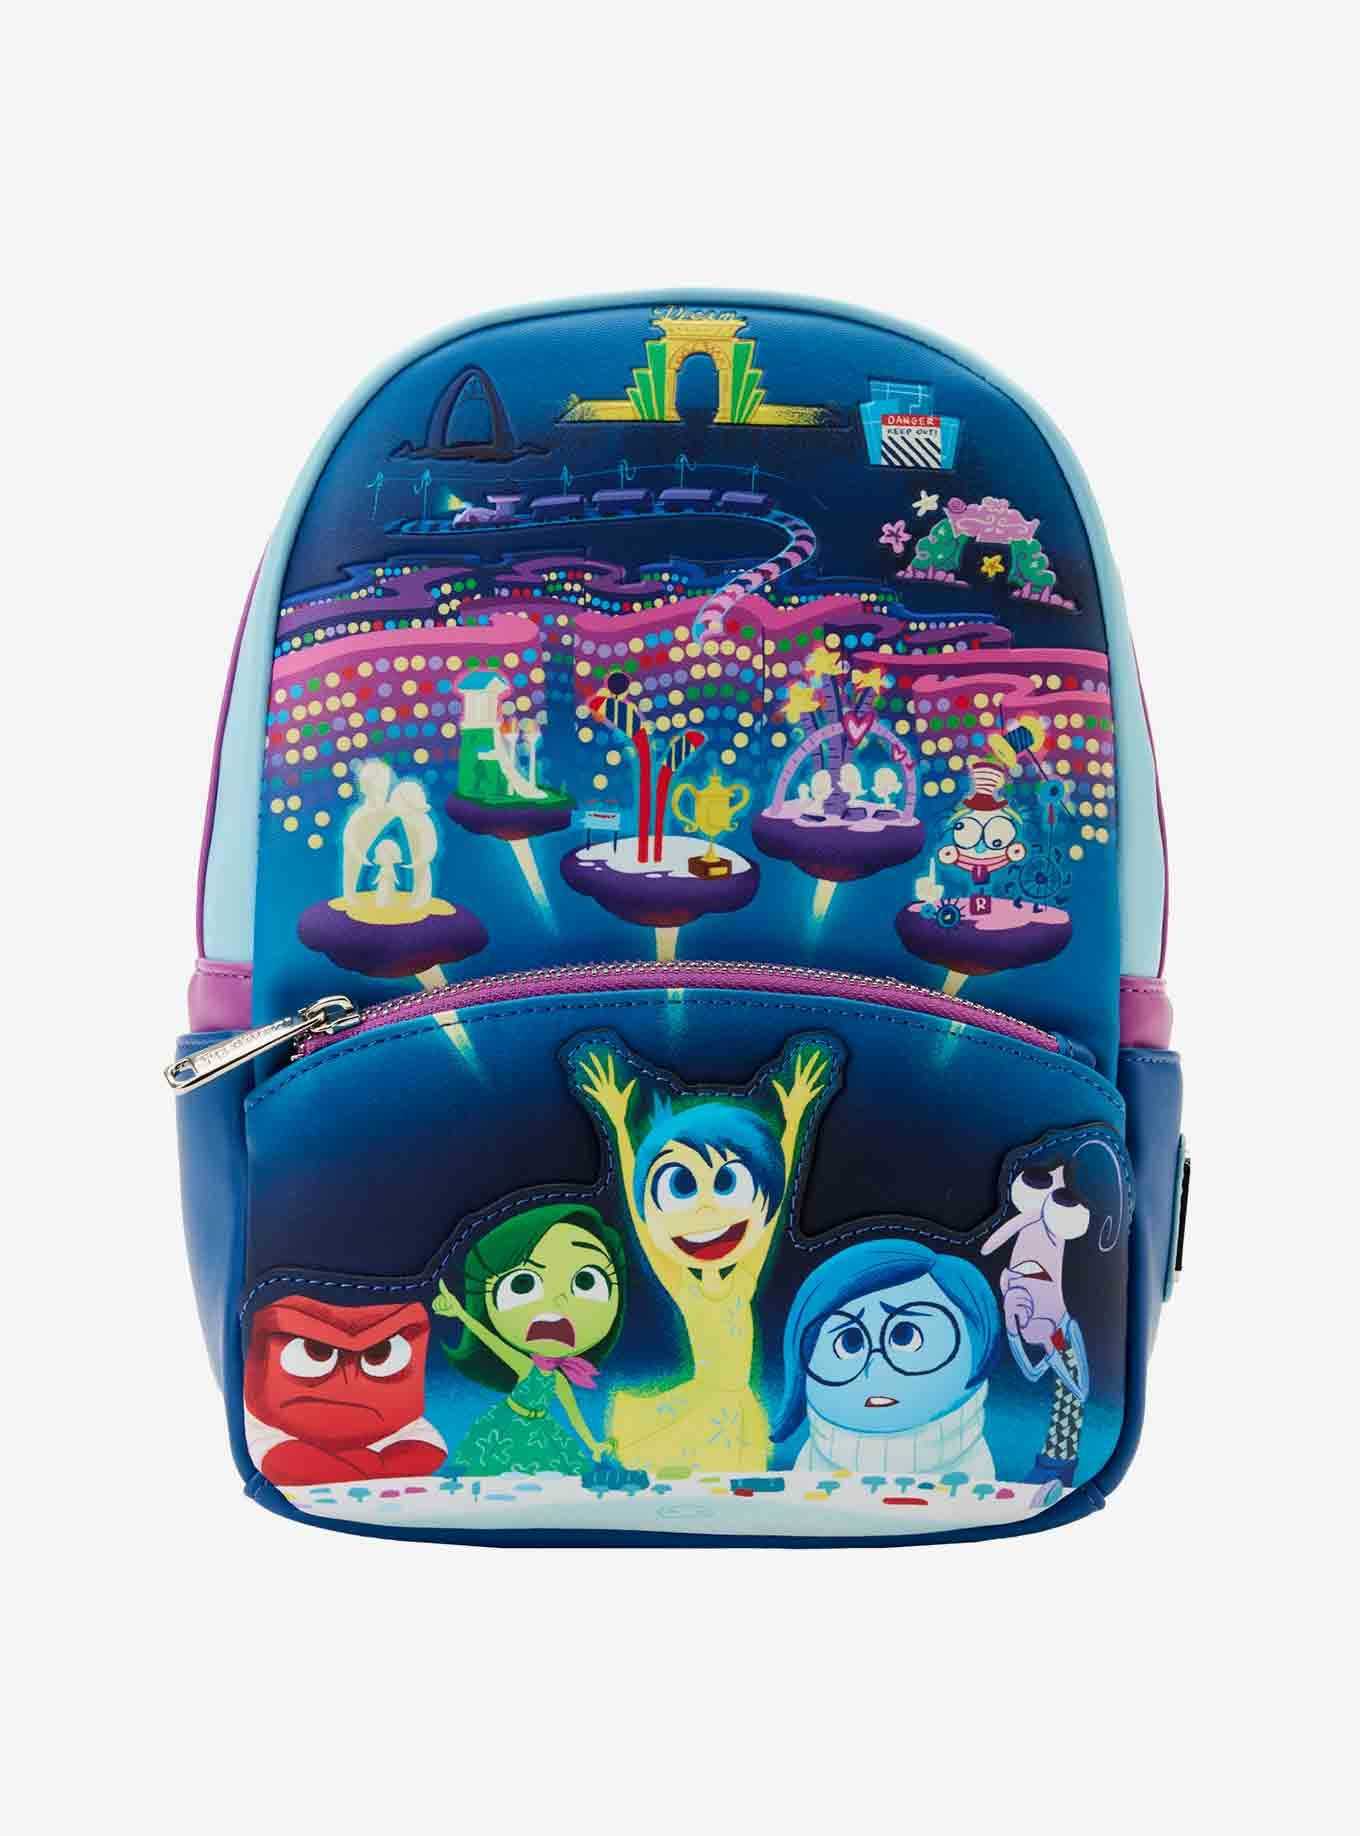 Loungefly Disney Pixar Inside Out Glow-In-The-Dark Mini Backpack, , hi-res